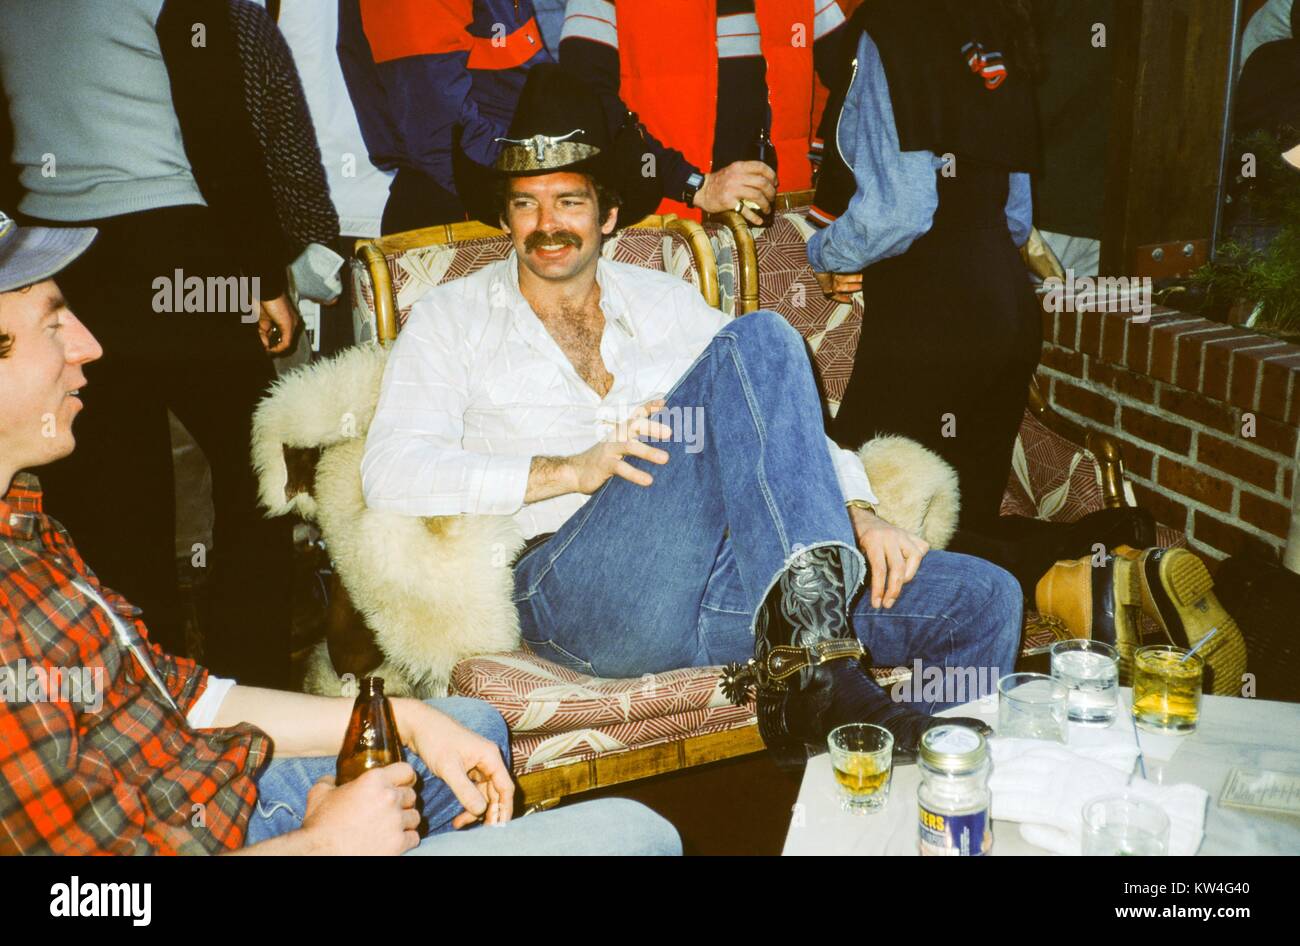 Man in cowboy hat and spurs, with a white shirt partially unbuttoned, sits with his feet up on a table, speaking and drinking alcohol with a man wearing a plaid shirt, 1975. Stock Photo